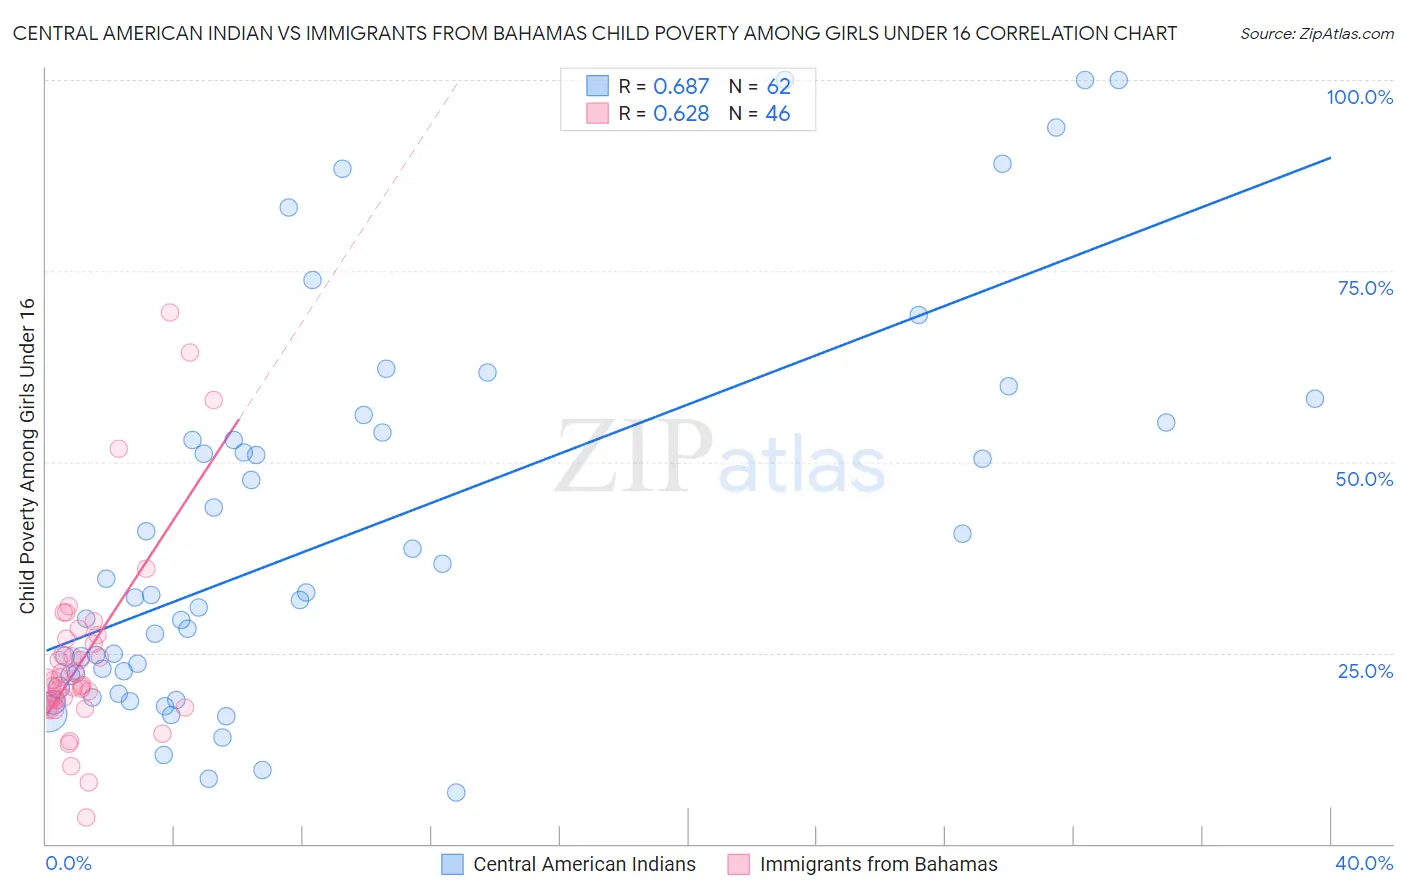 Central American Indian vs Immigrants from Bahamas Child Poverty Among Girls Under 16